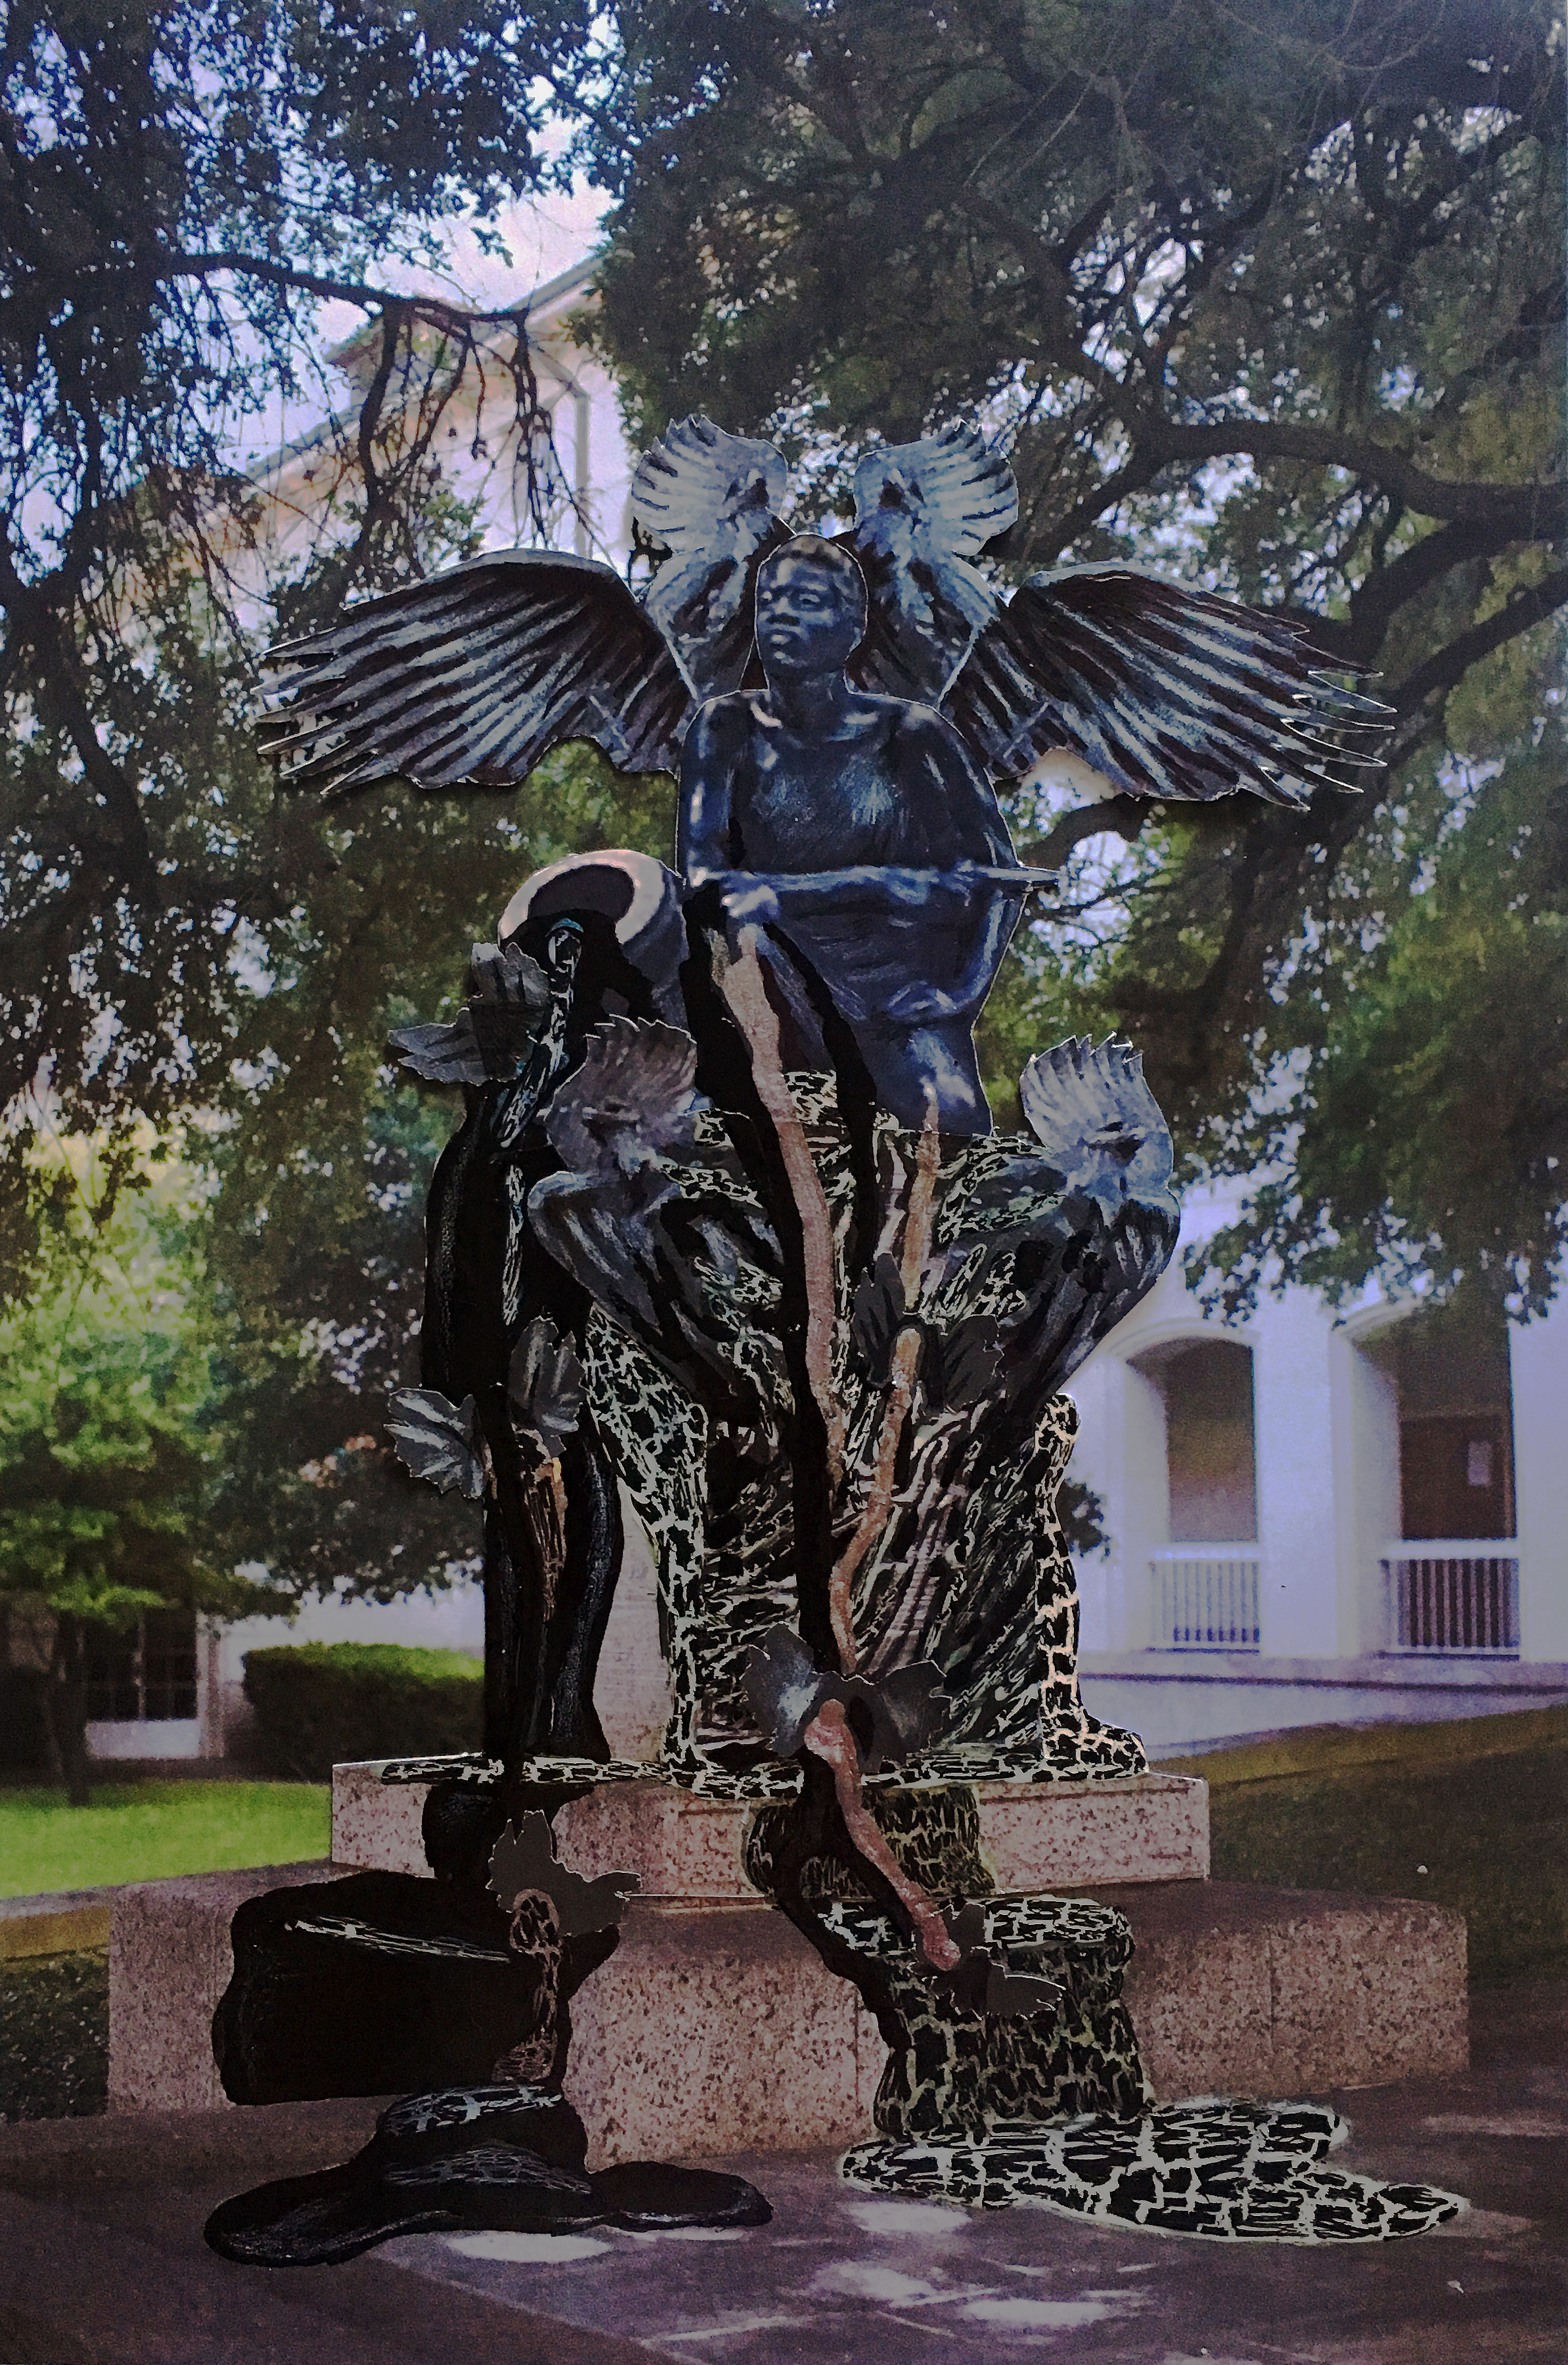 A paper collage on inkjet print. The image is of a large statue of a crouching African American Sailor with wings, emerging and arising from alchemical ooze. The figure looks confident and determined, yet calm. 